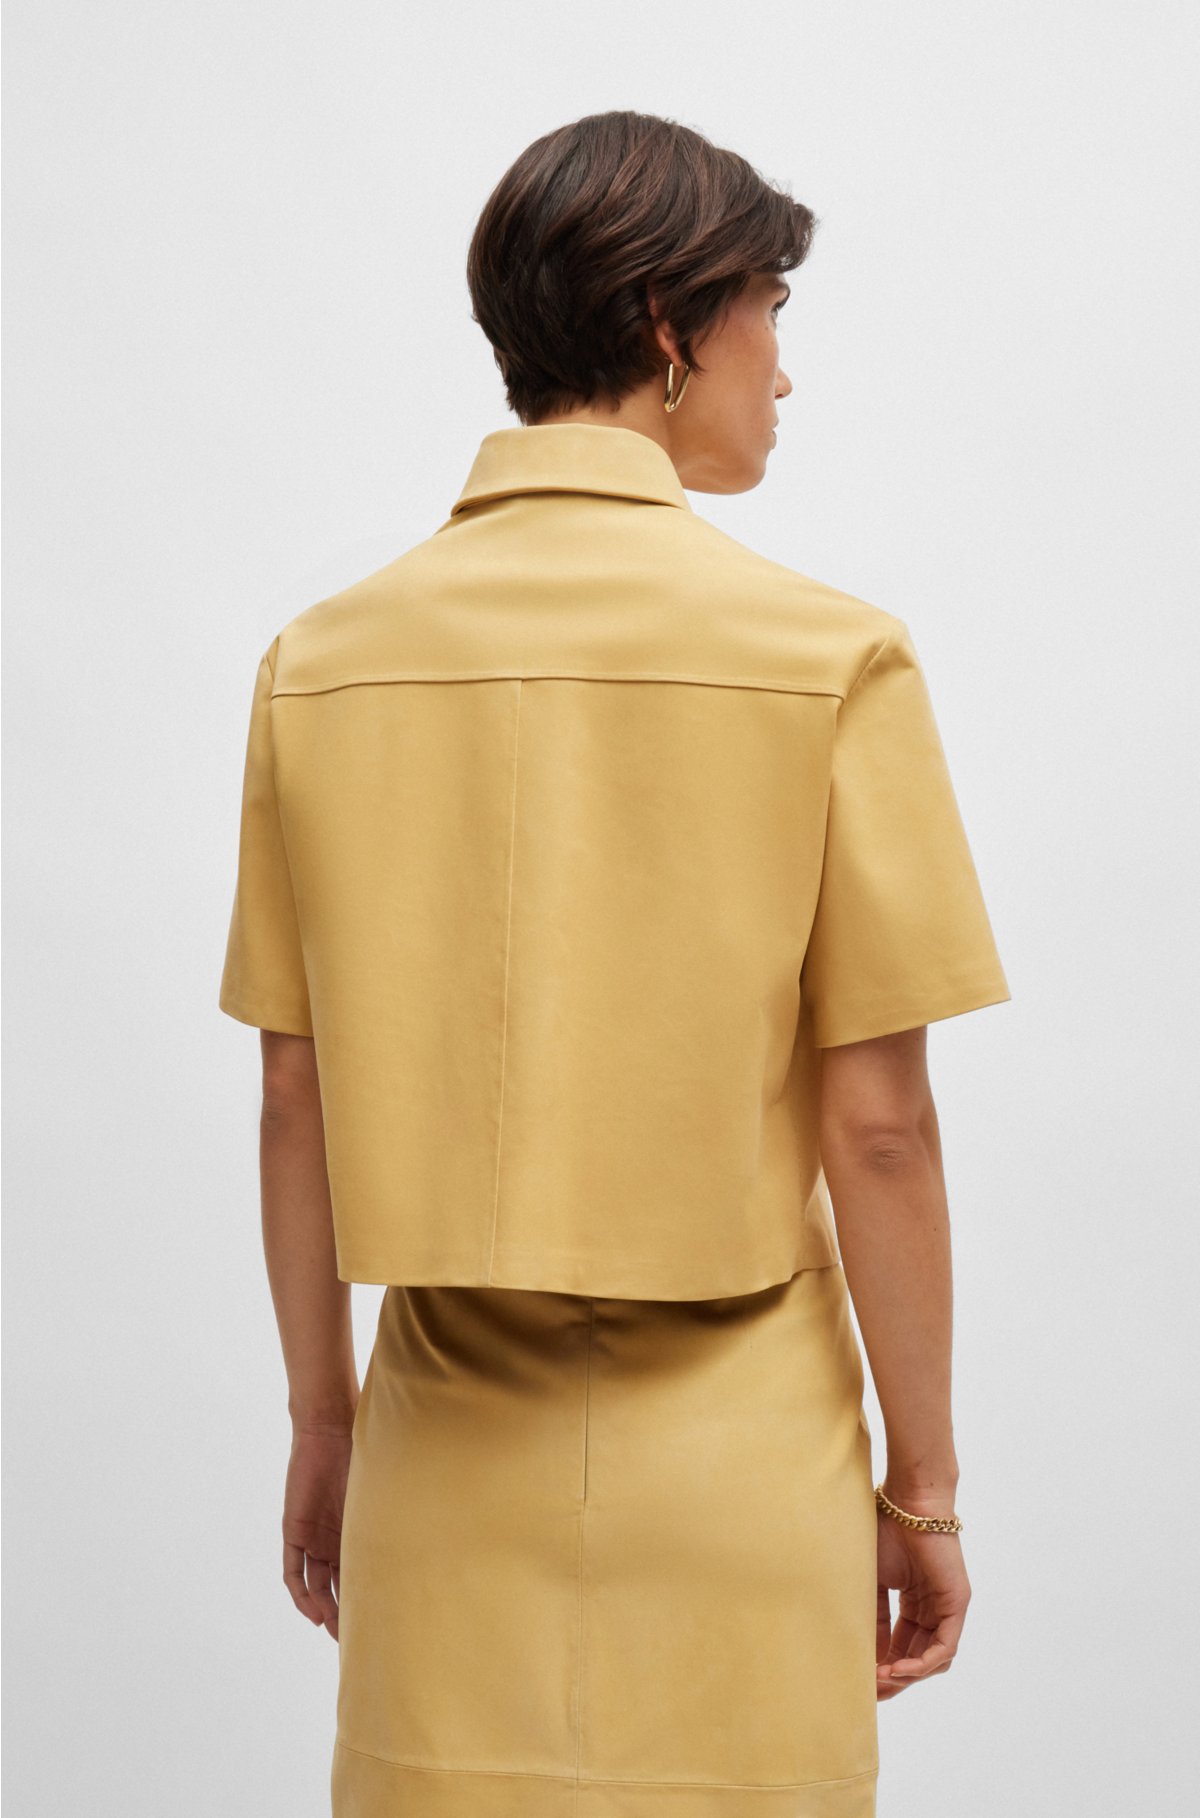 Cropped jacket in nubuck leather with chest pockets, Yellow